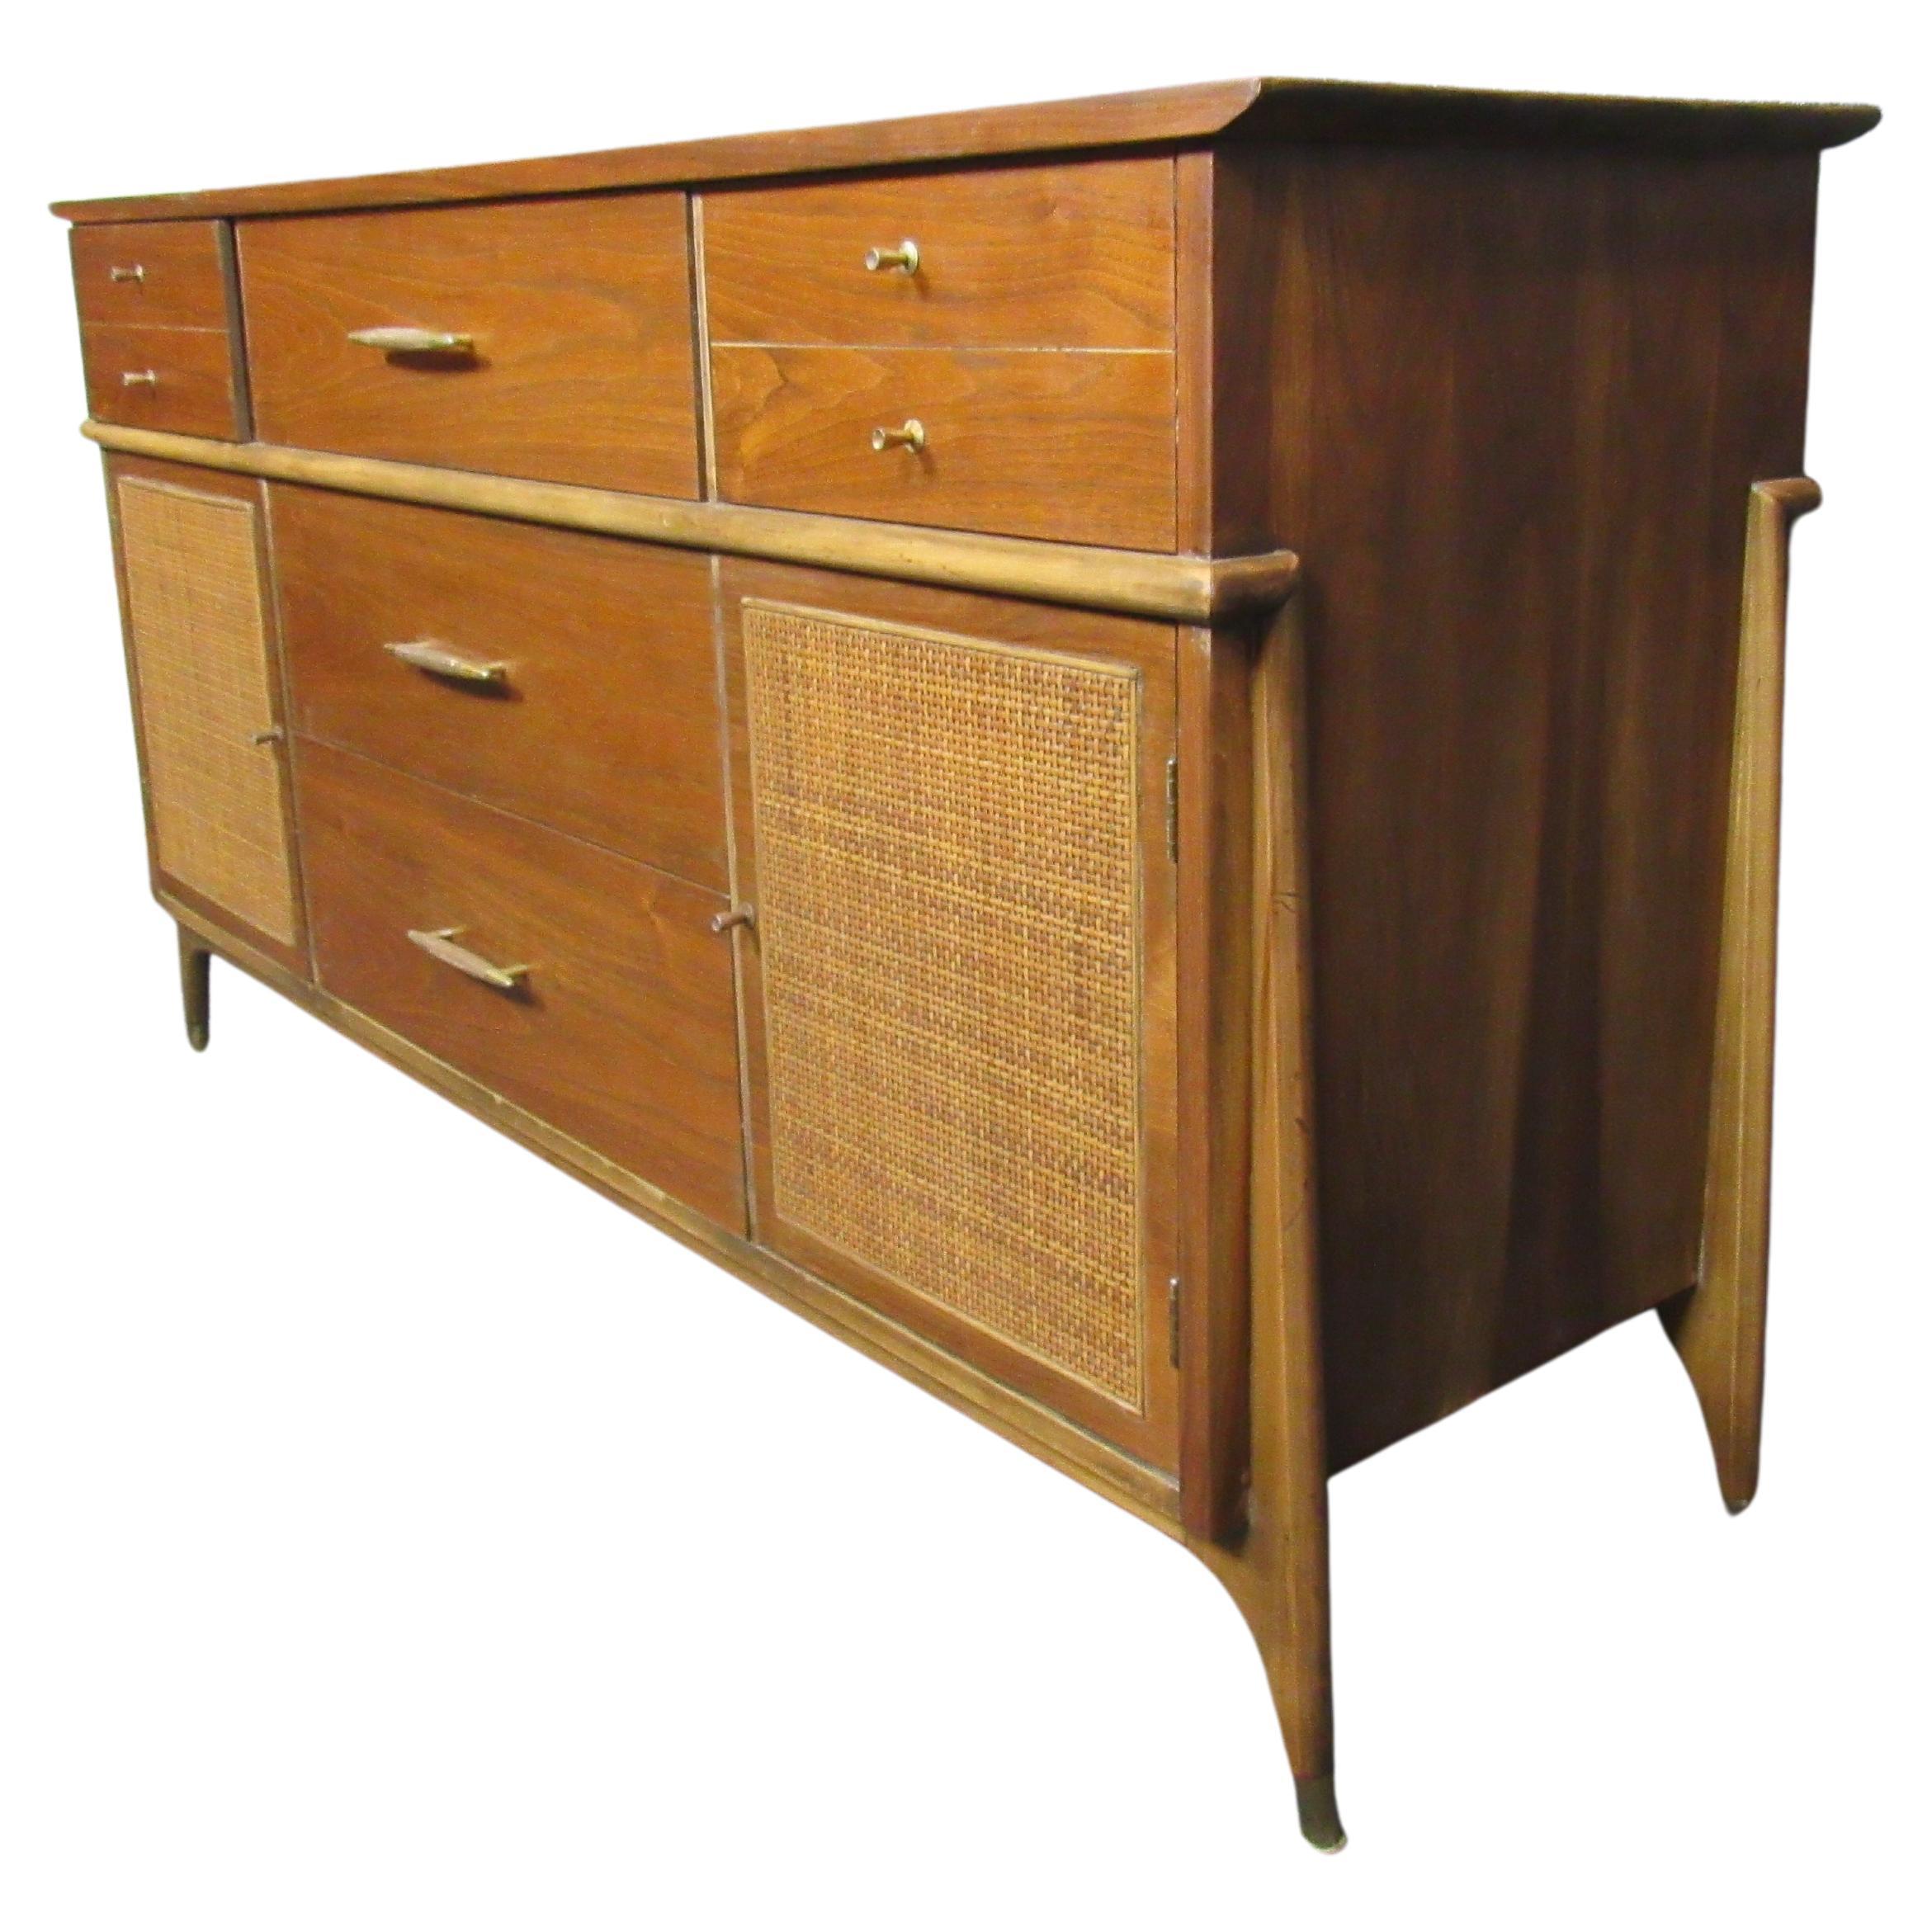 Amazing vintage mid-century dresser. The marvelous wood grain shines through with beautiful carved binding and contrasting wicker and brass accents. Features seven pull-out drawers with two large side cabinets for plenty of storage and